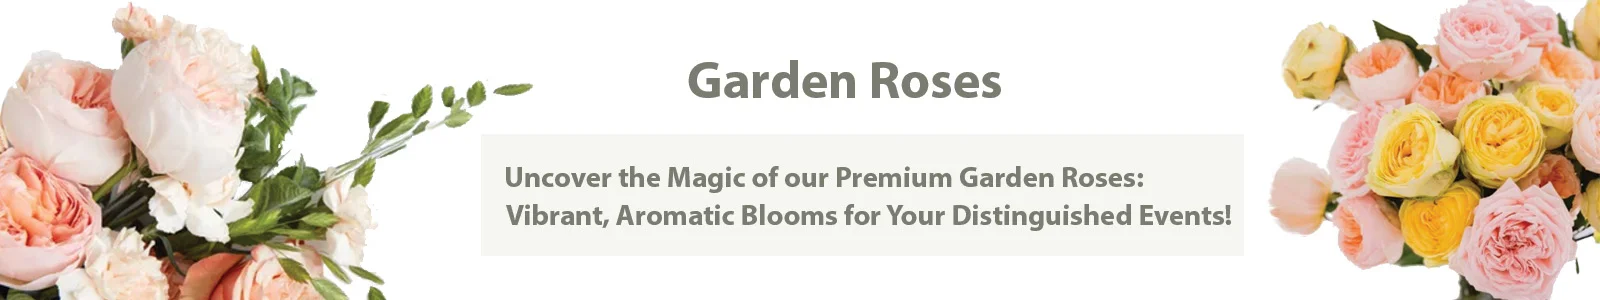 Experience the elegance of our premium garden roses, their vibrant colors and fragrant blooms enhancing any event.